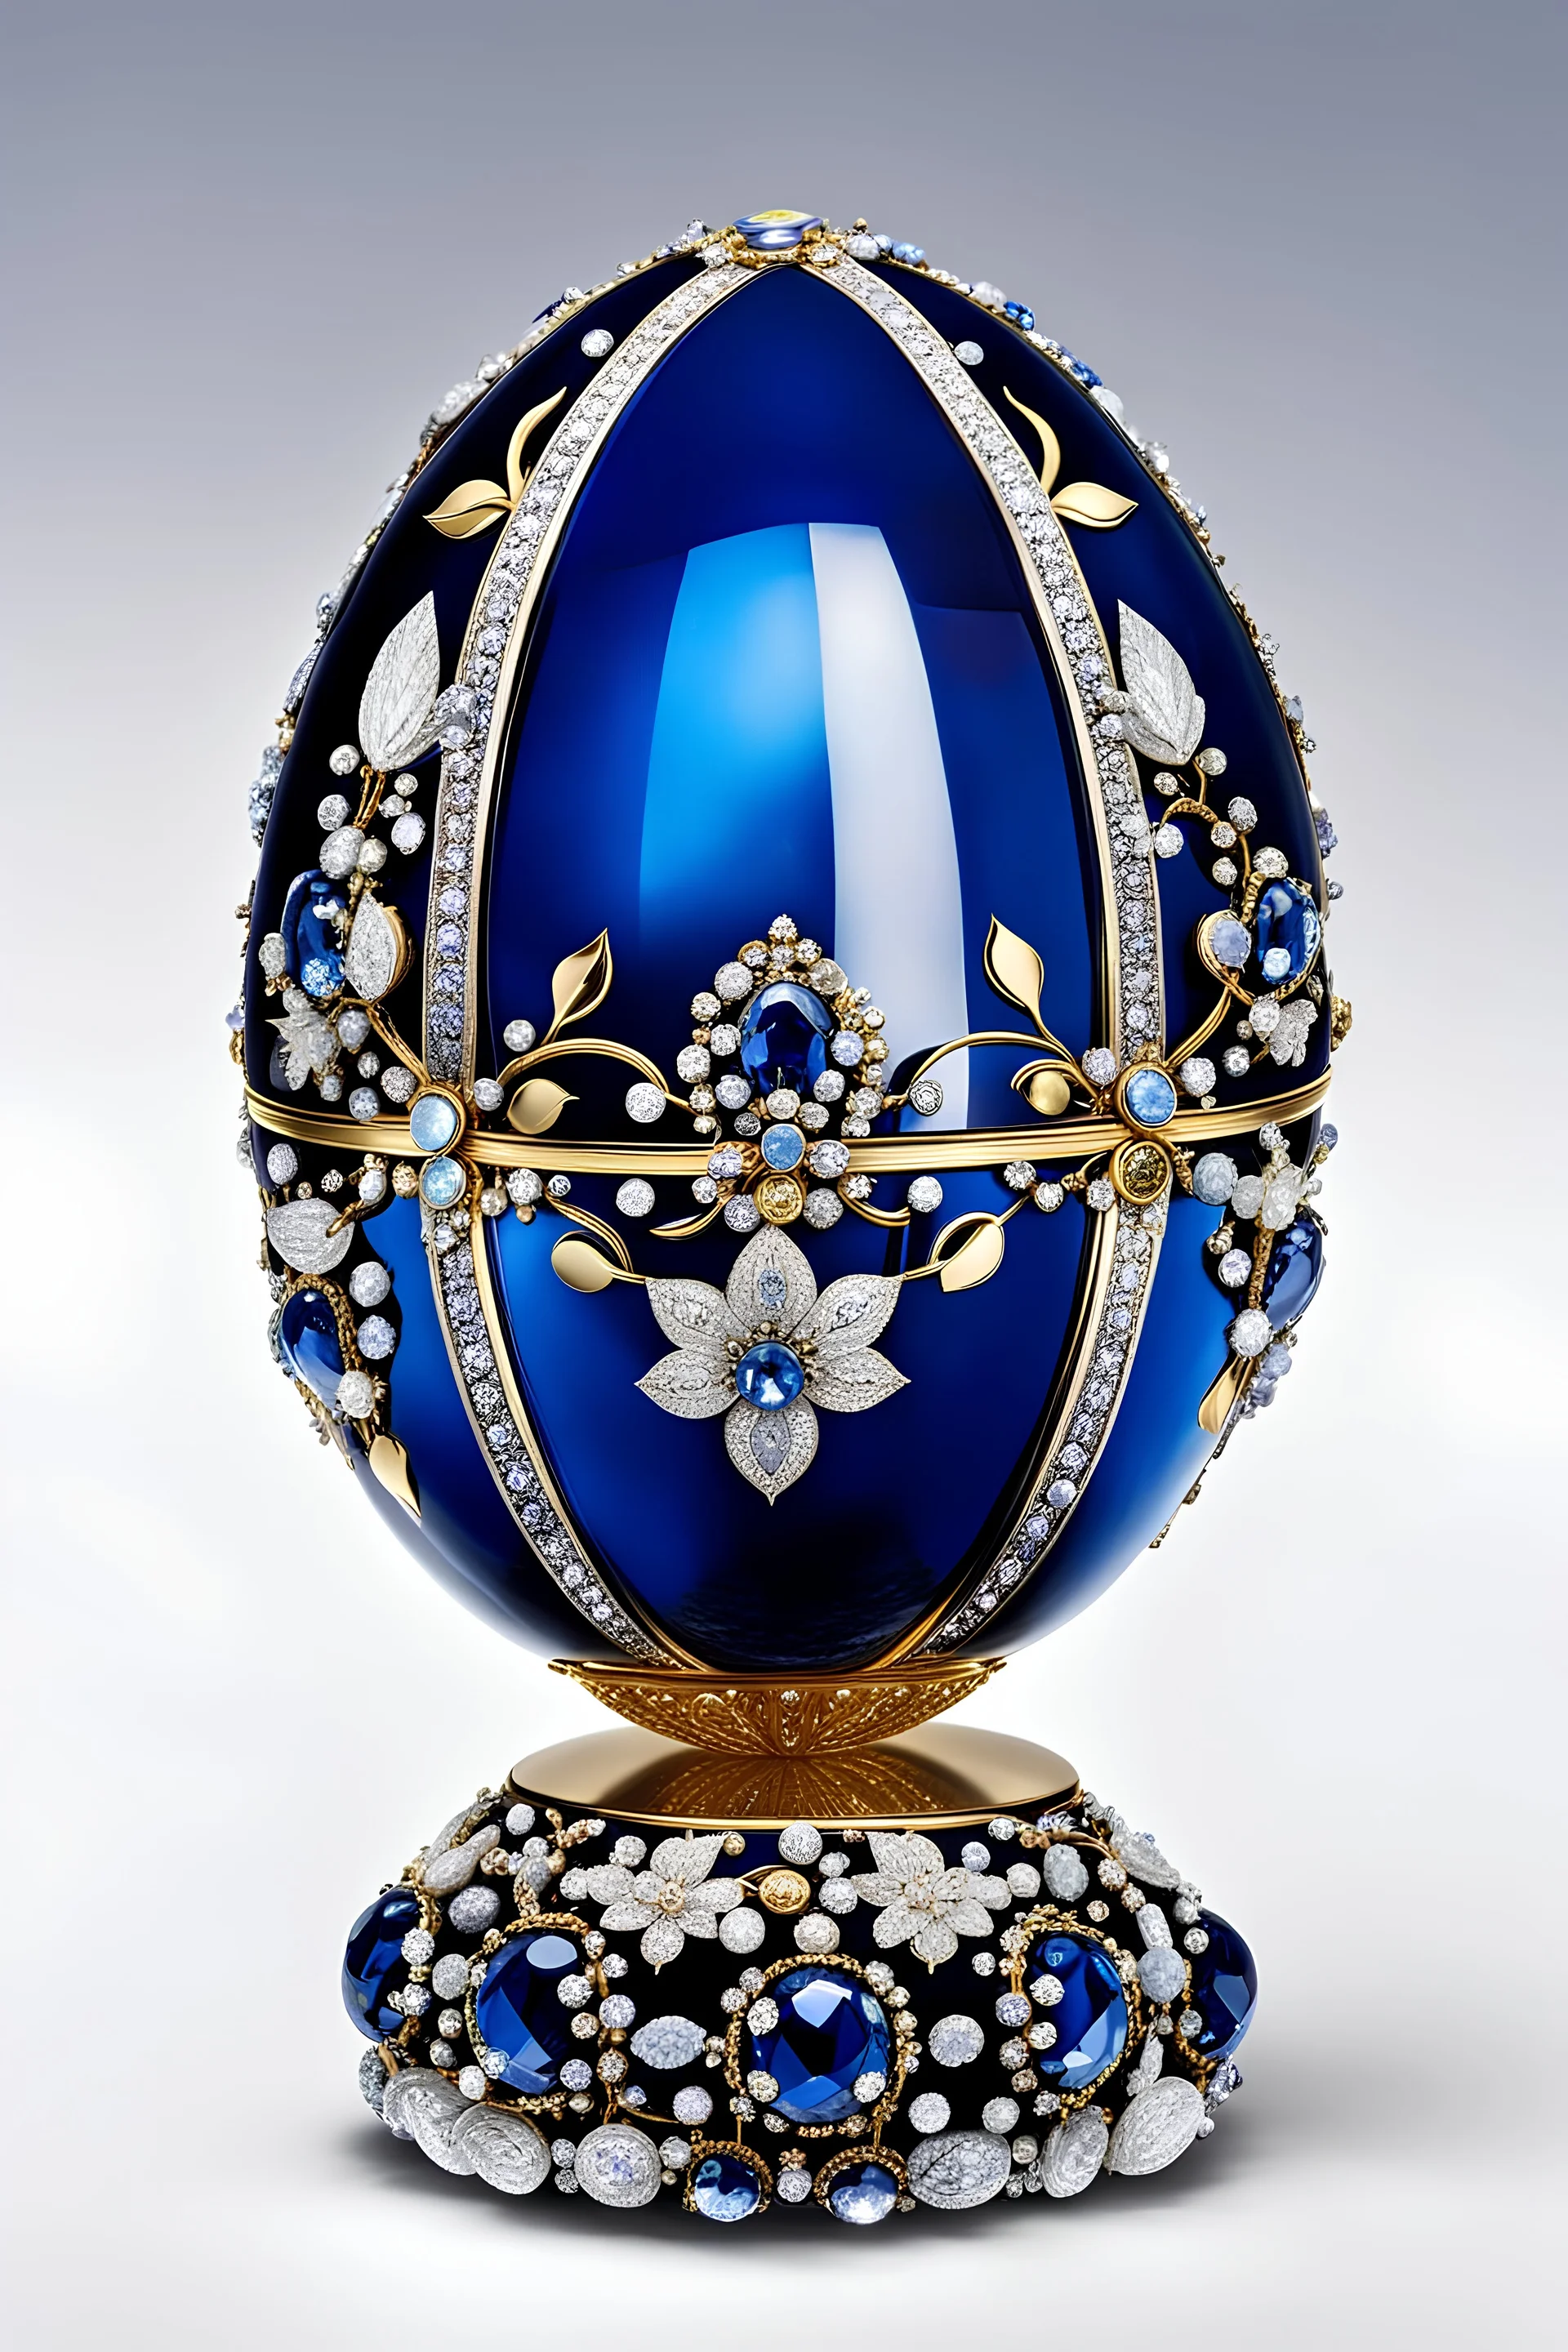 A Fabergé jewelled egg, the exterior of the egg resembles perfect blue crystal egg formed with many gold decorations. It is studded with diamonds and is made from quartz, platinum, and orthoclase with miniature flowers, diamonds and made from platinum and gold, the flowers and plants made of white quartz and gold, The box features decorative Swarovski crystals and an enamel finish, high quality, detailed, photography, stunning